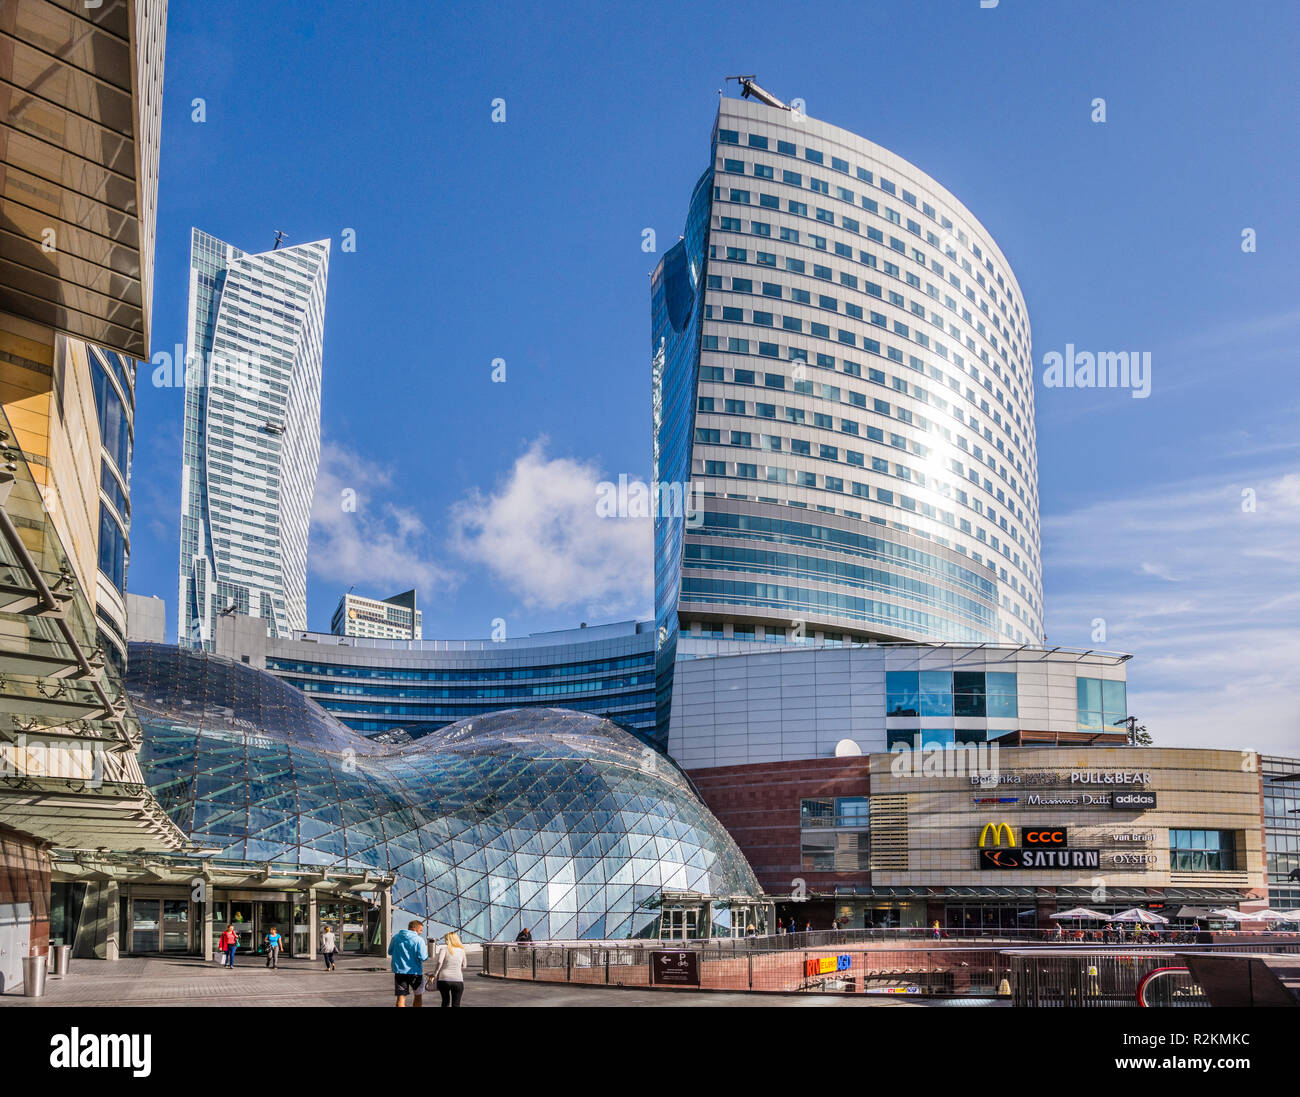 Złote Tarasy (Golden Terraces) shopping and entertainment complex with its  signature transparend roof over the central indoor courtyard in central War  Stock Photo - Alamy